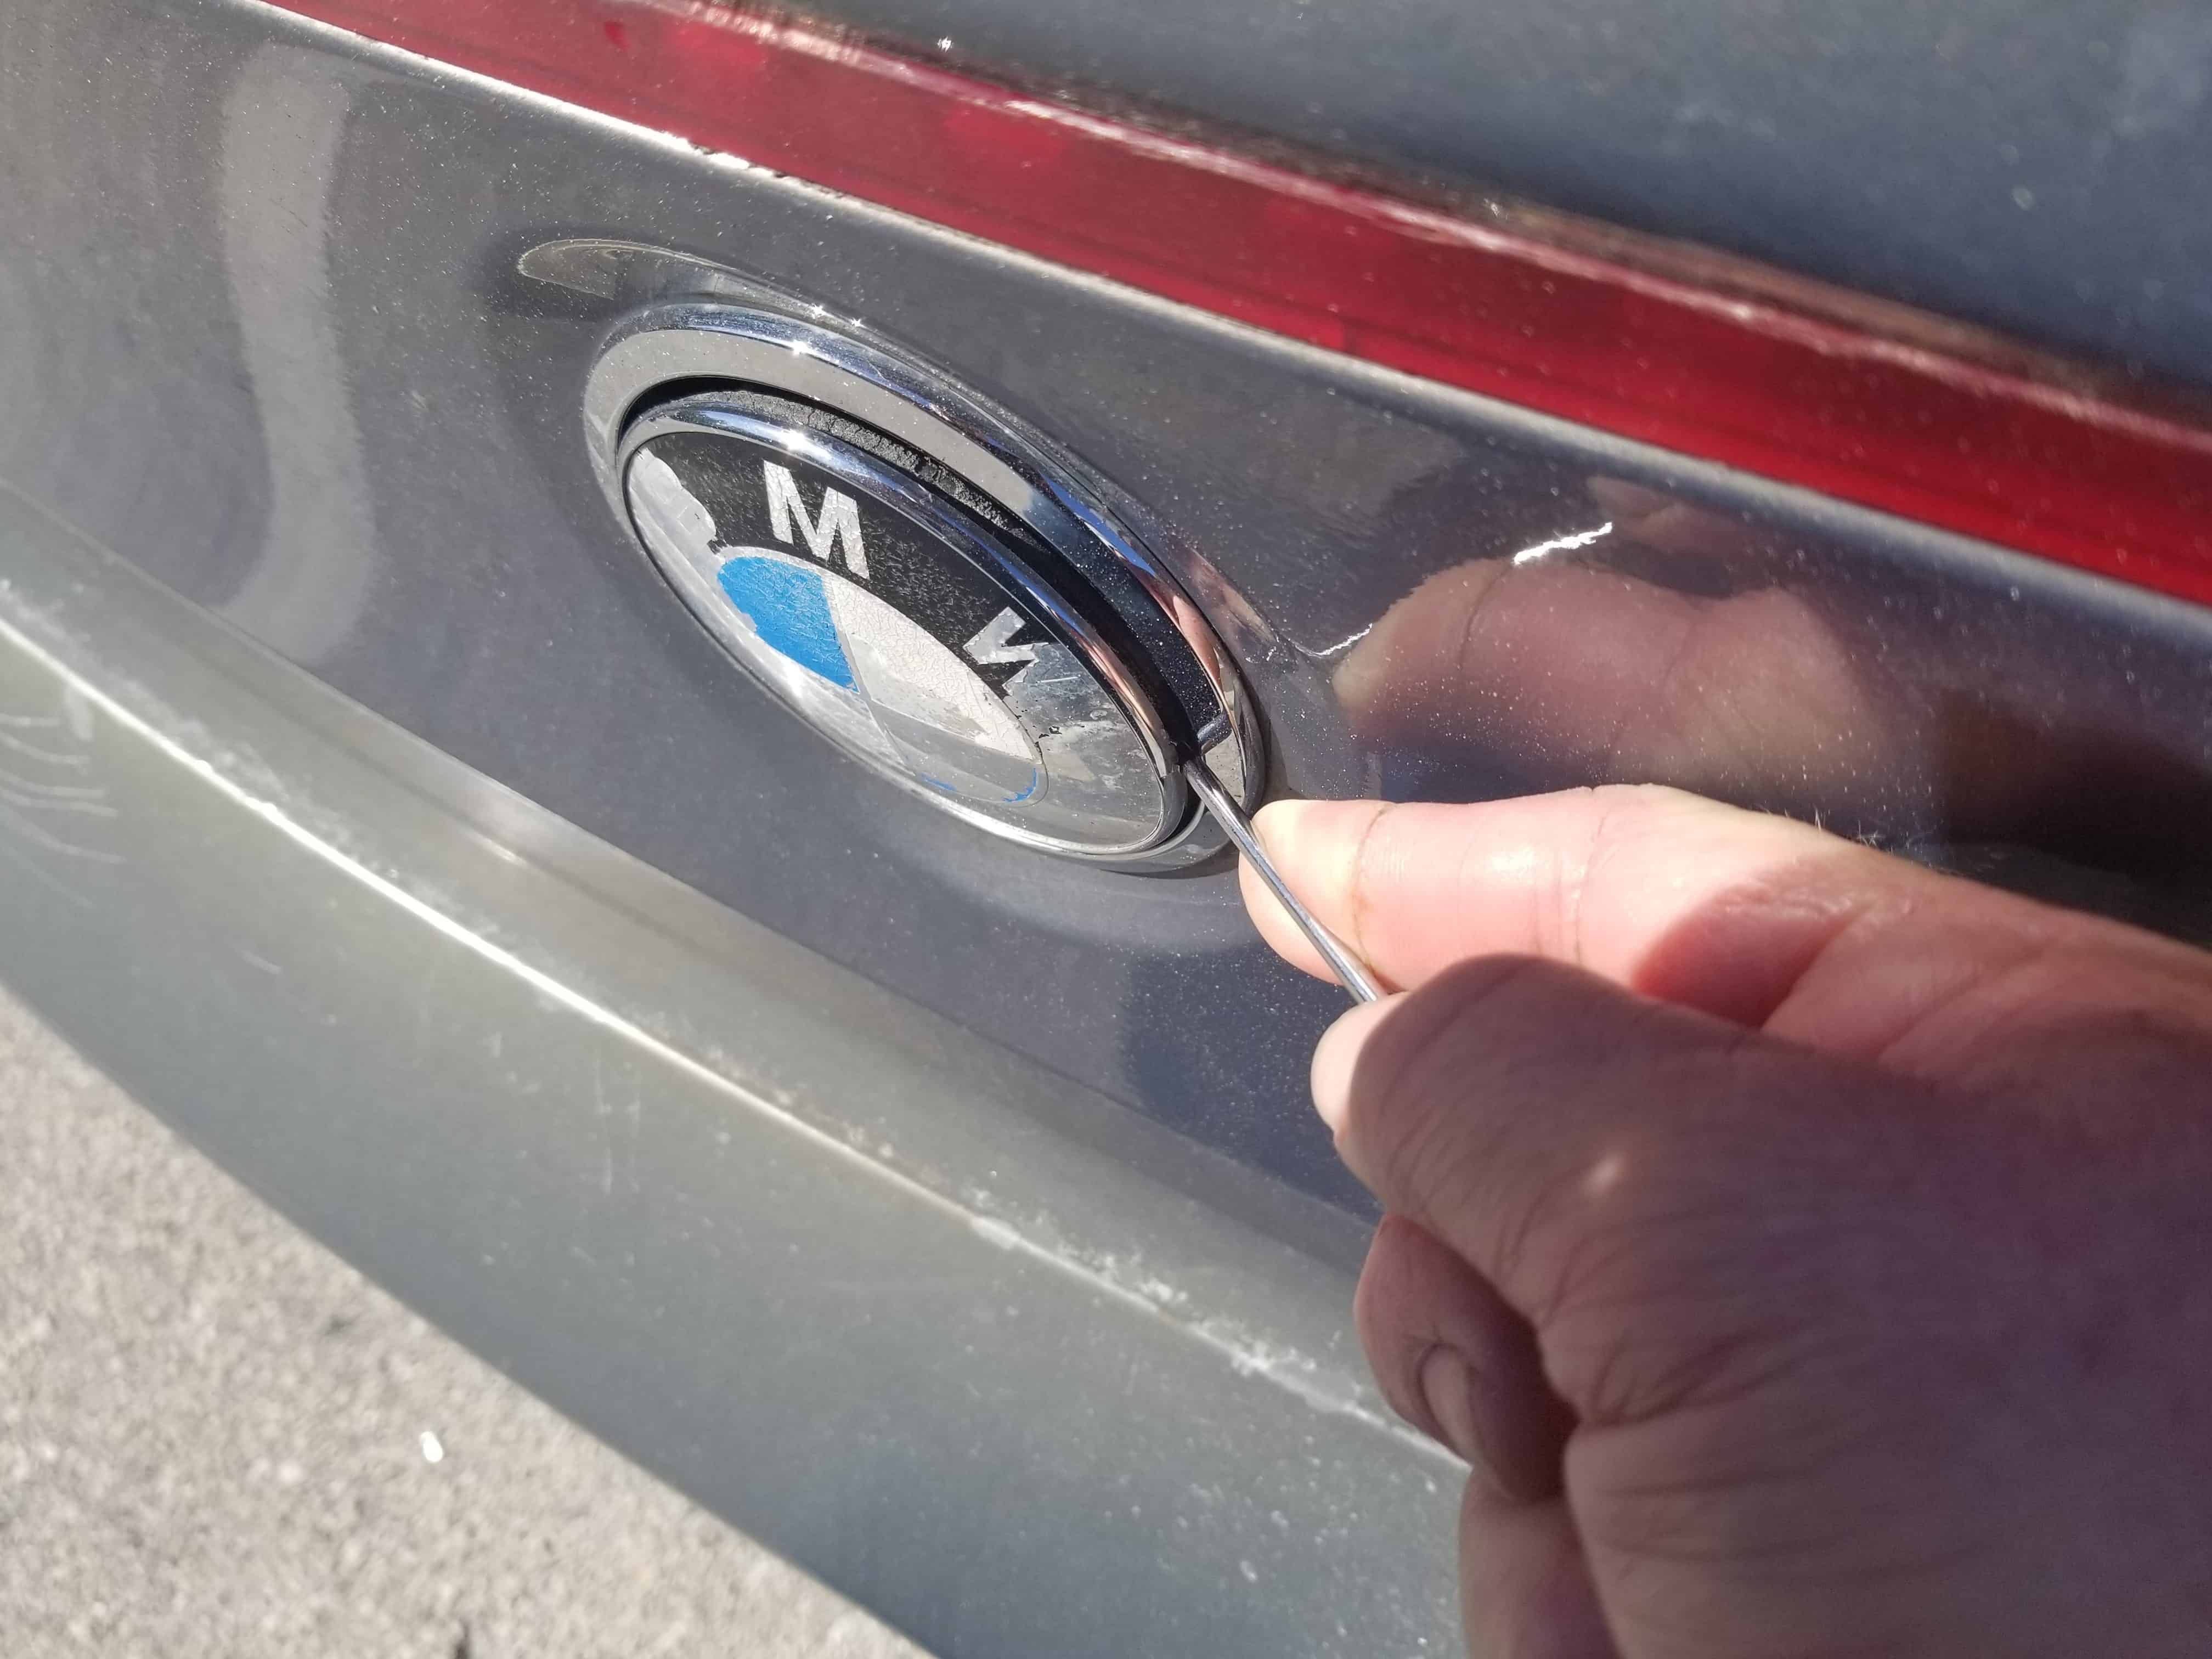 BMW 645ci emblem replacement - Use a metal pick to pry the emblem free